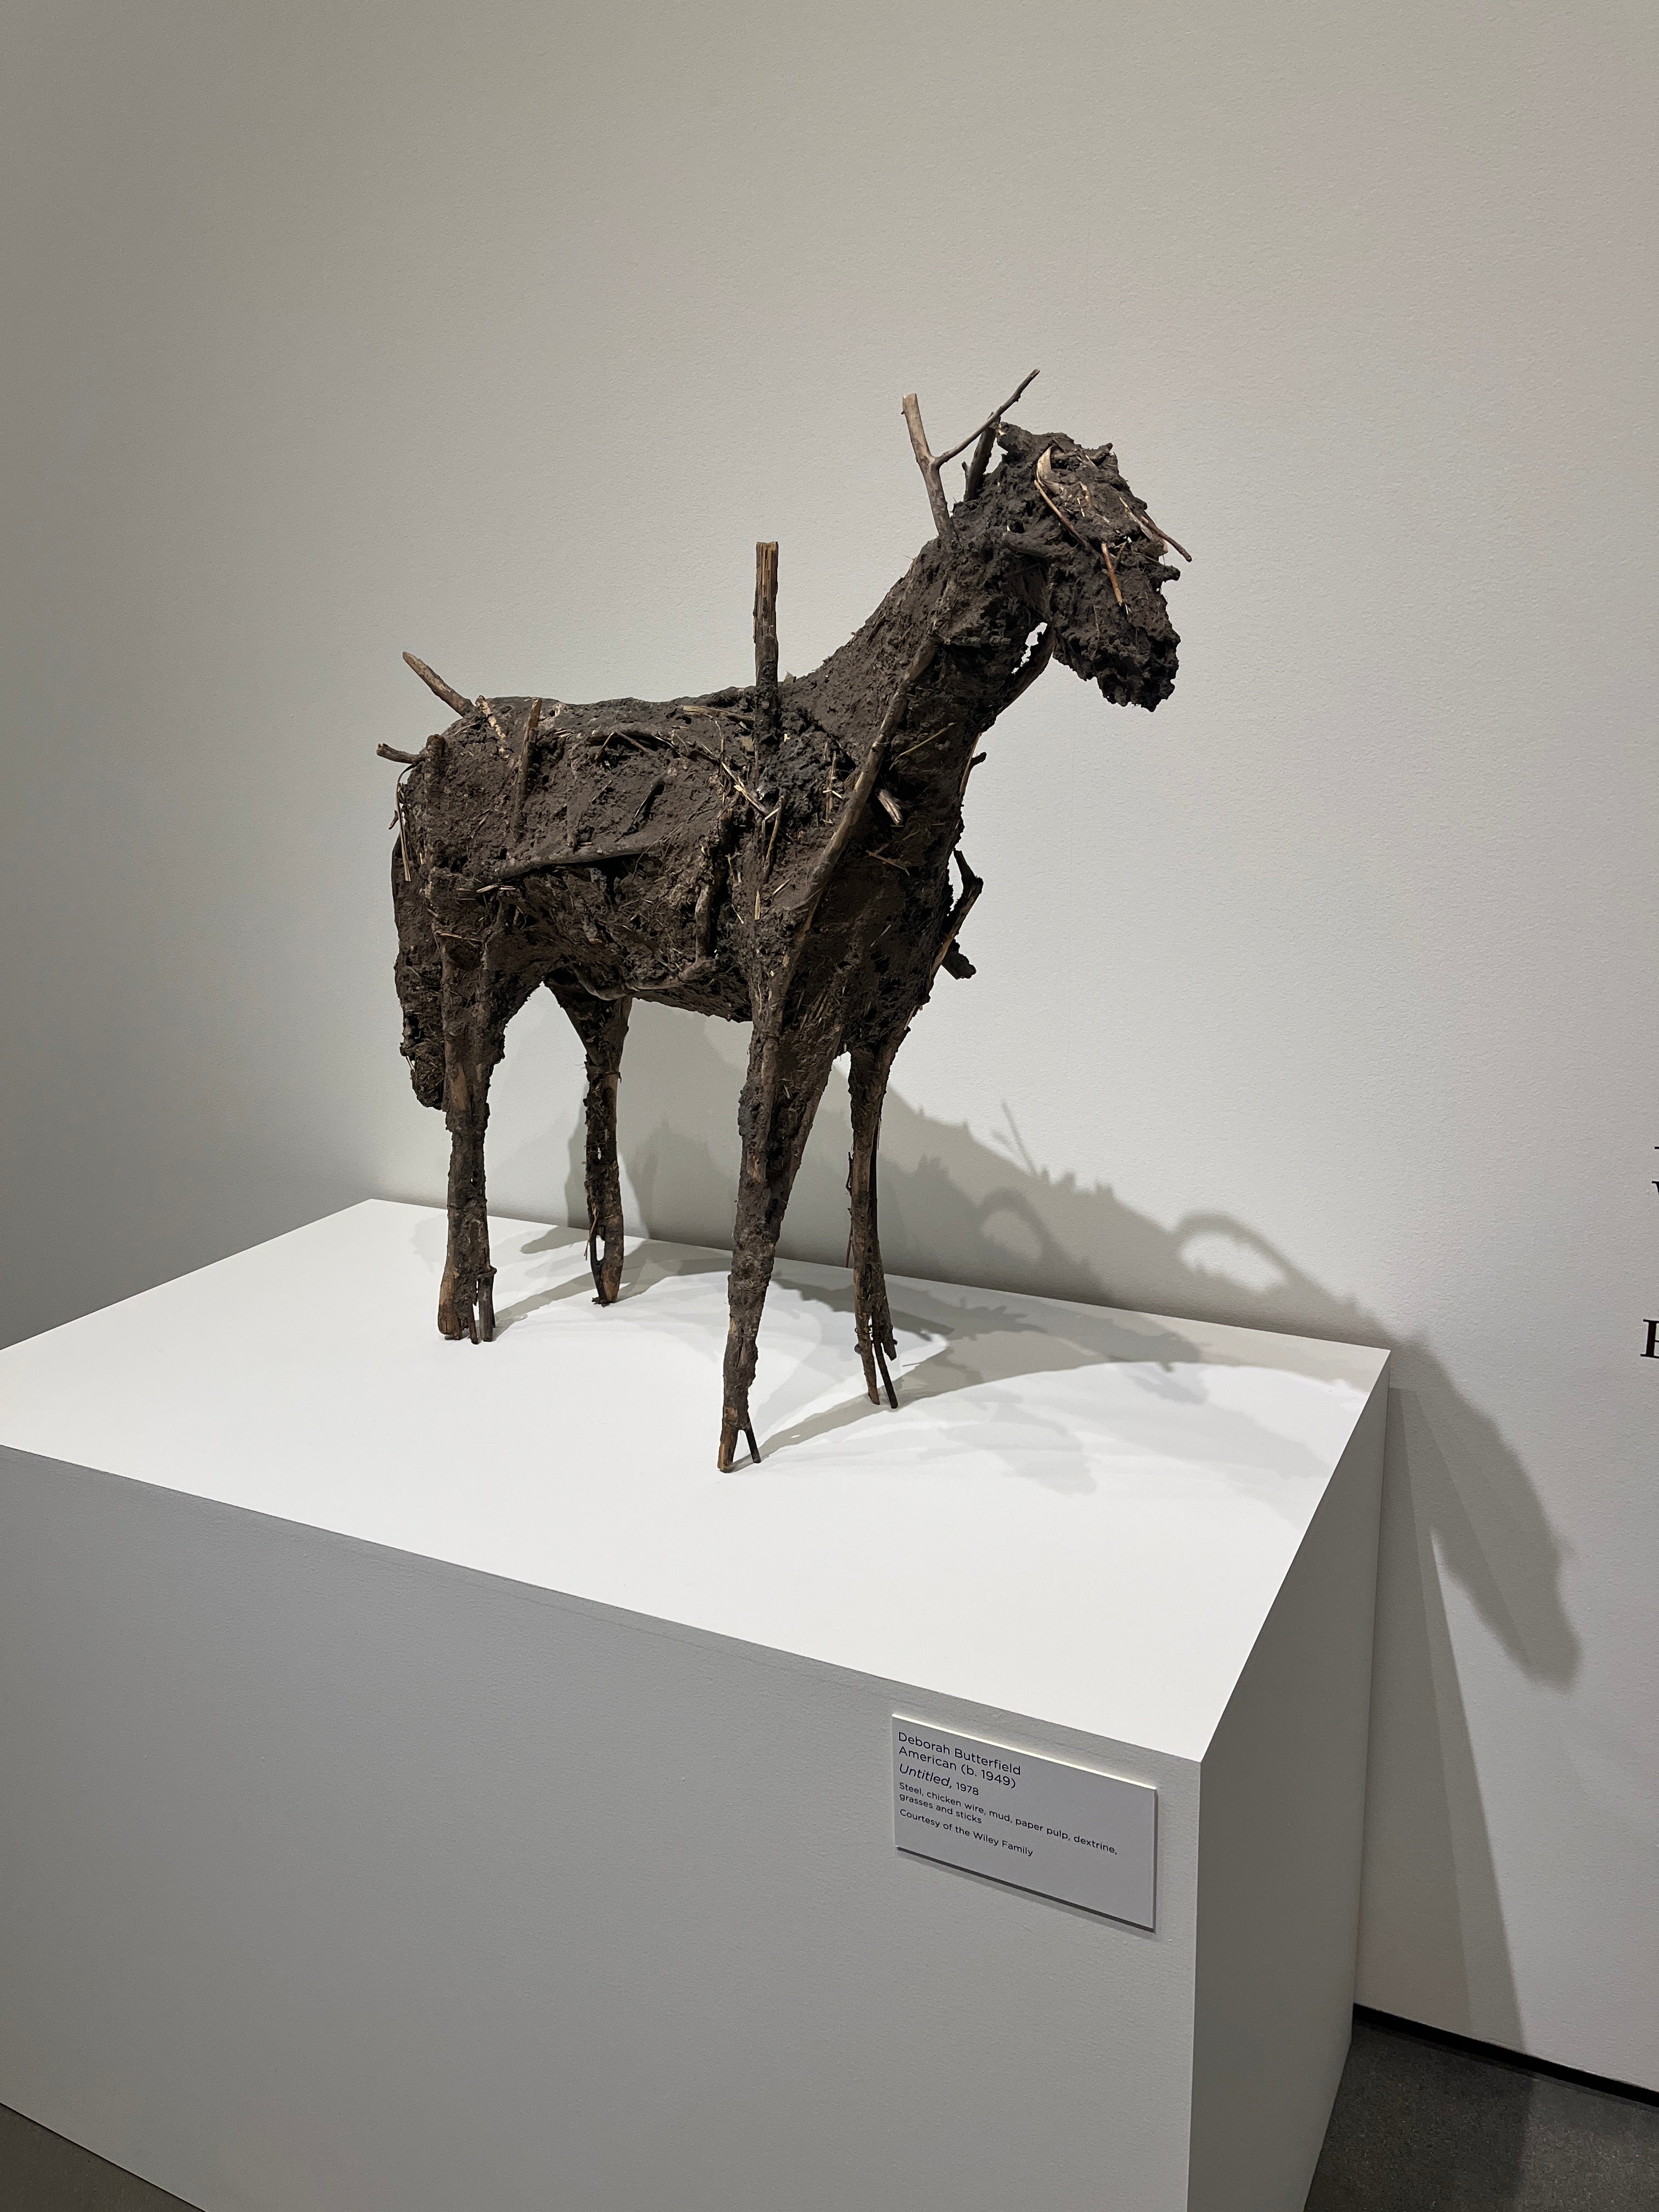 mud and stick sculpture of a horse